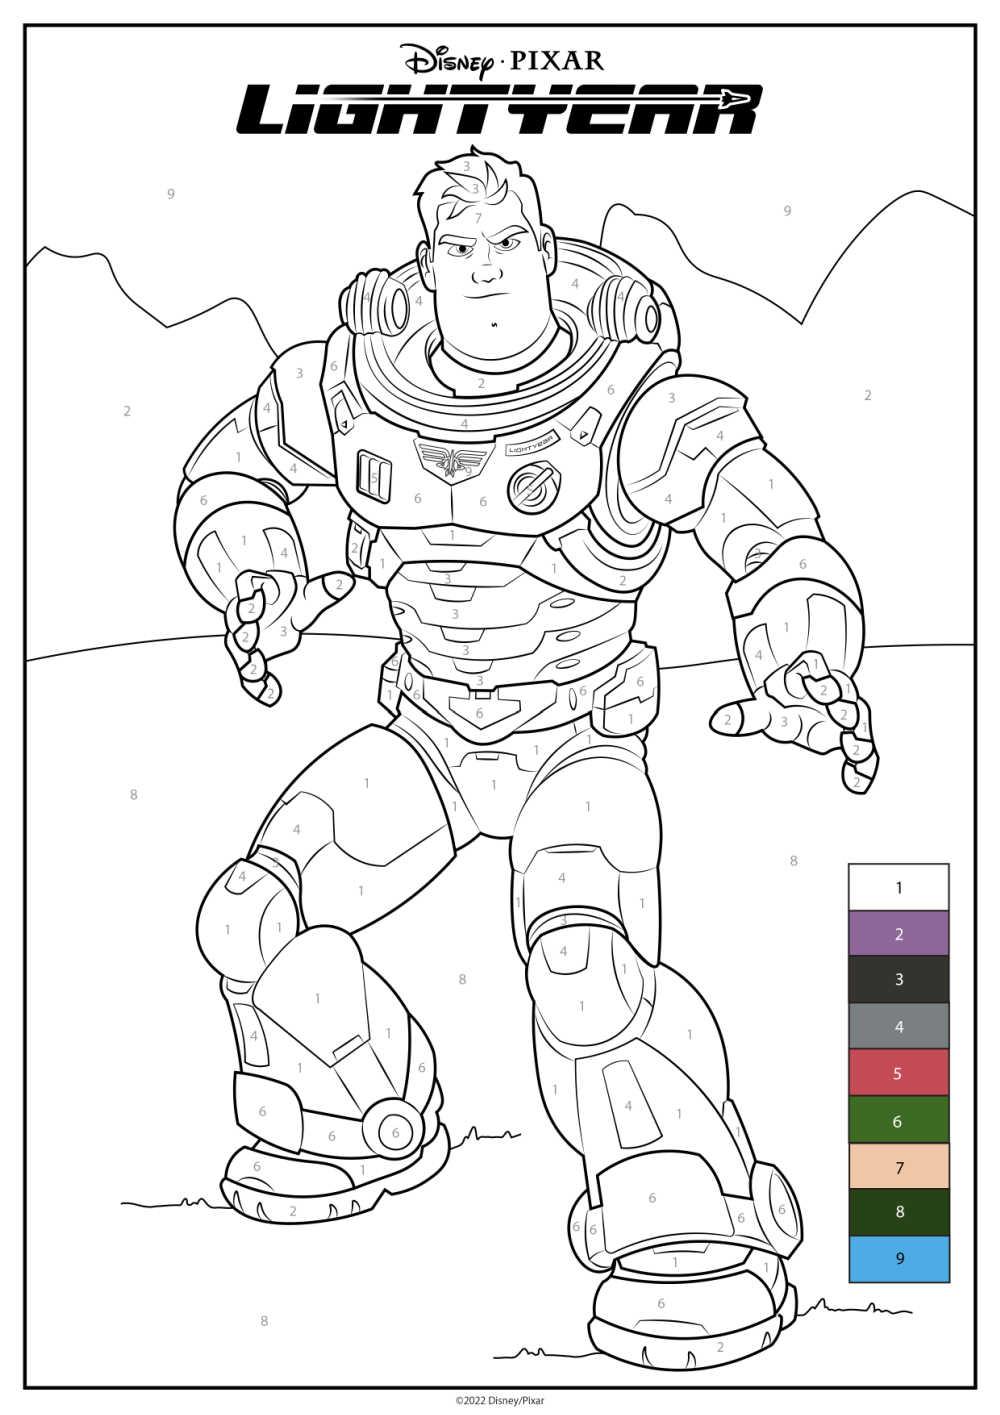 Great Buzz Lightyear Free Printable Activity Book. - Oh My Fiesta! in  english